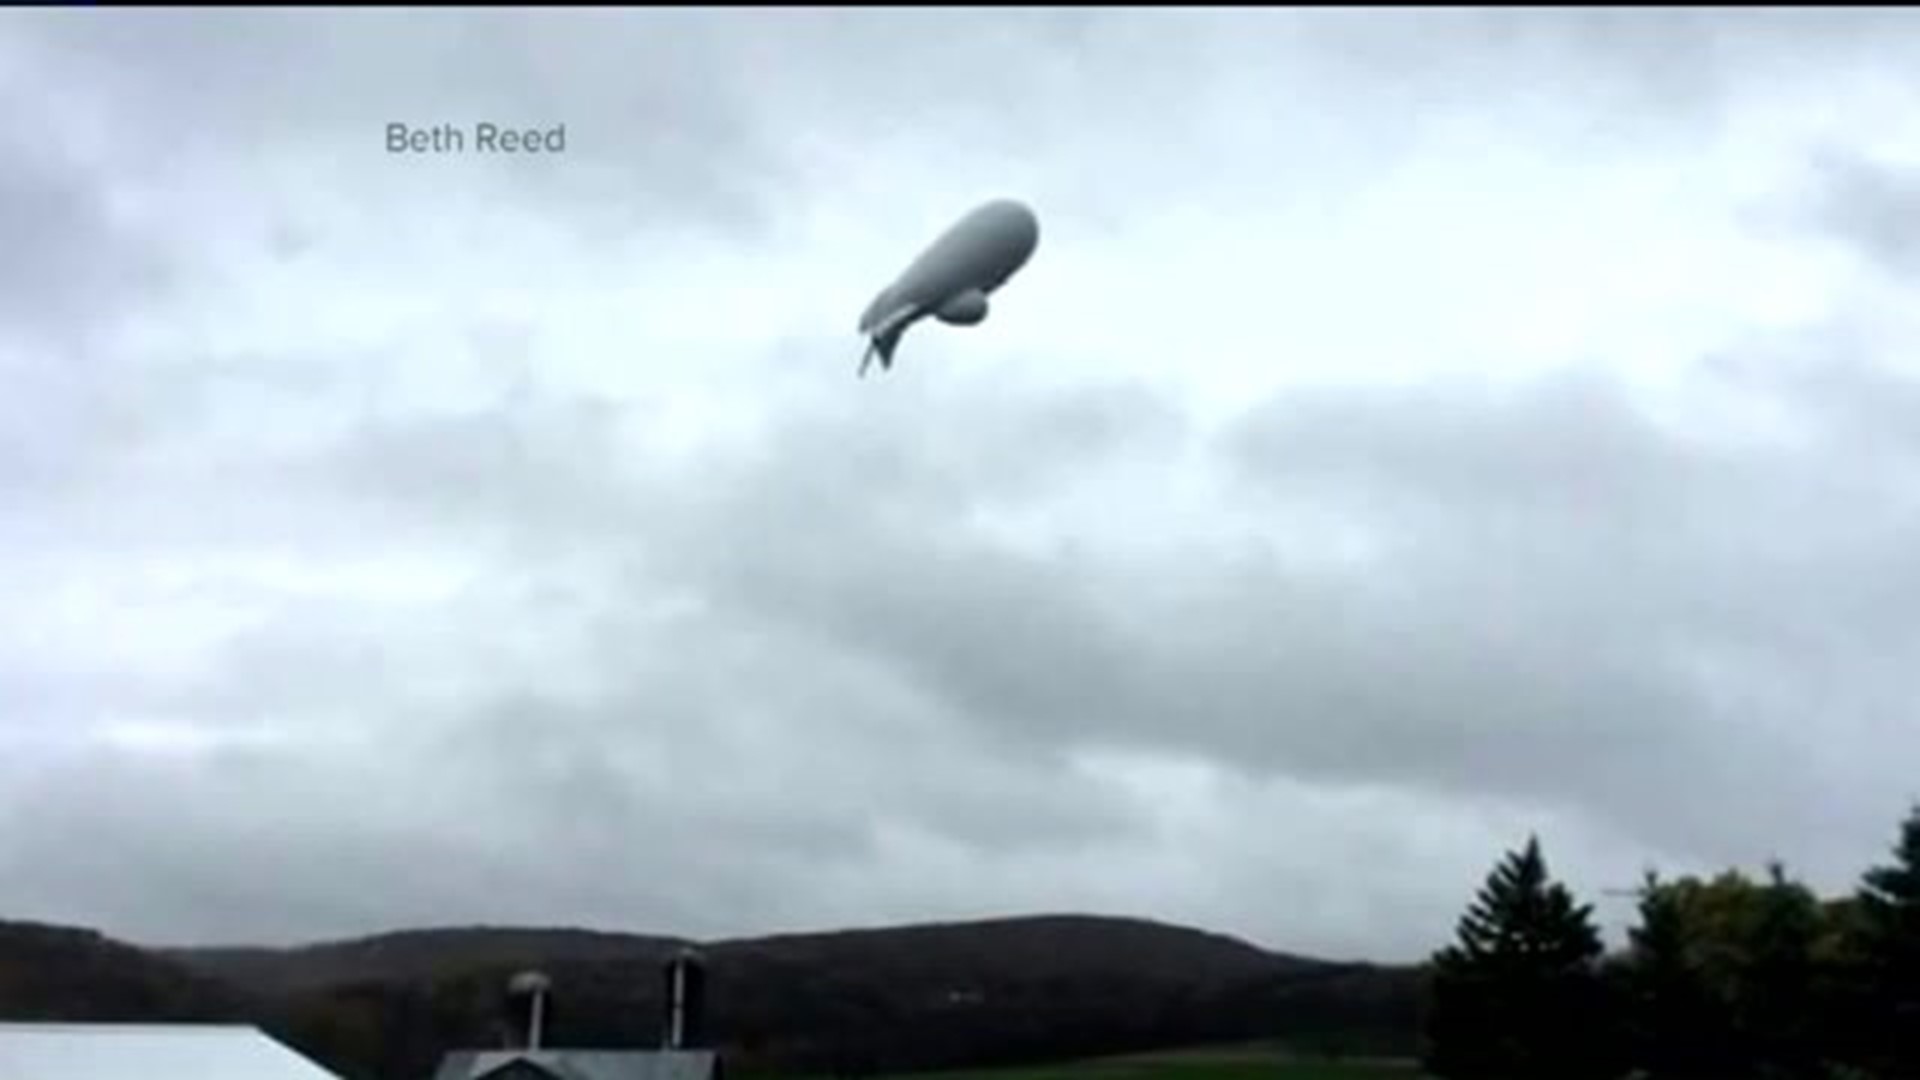 Military Blimp Landed in Central PA One Year Ago Today